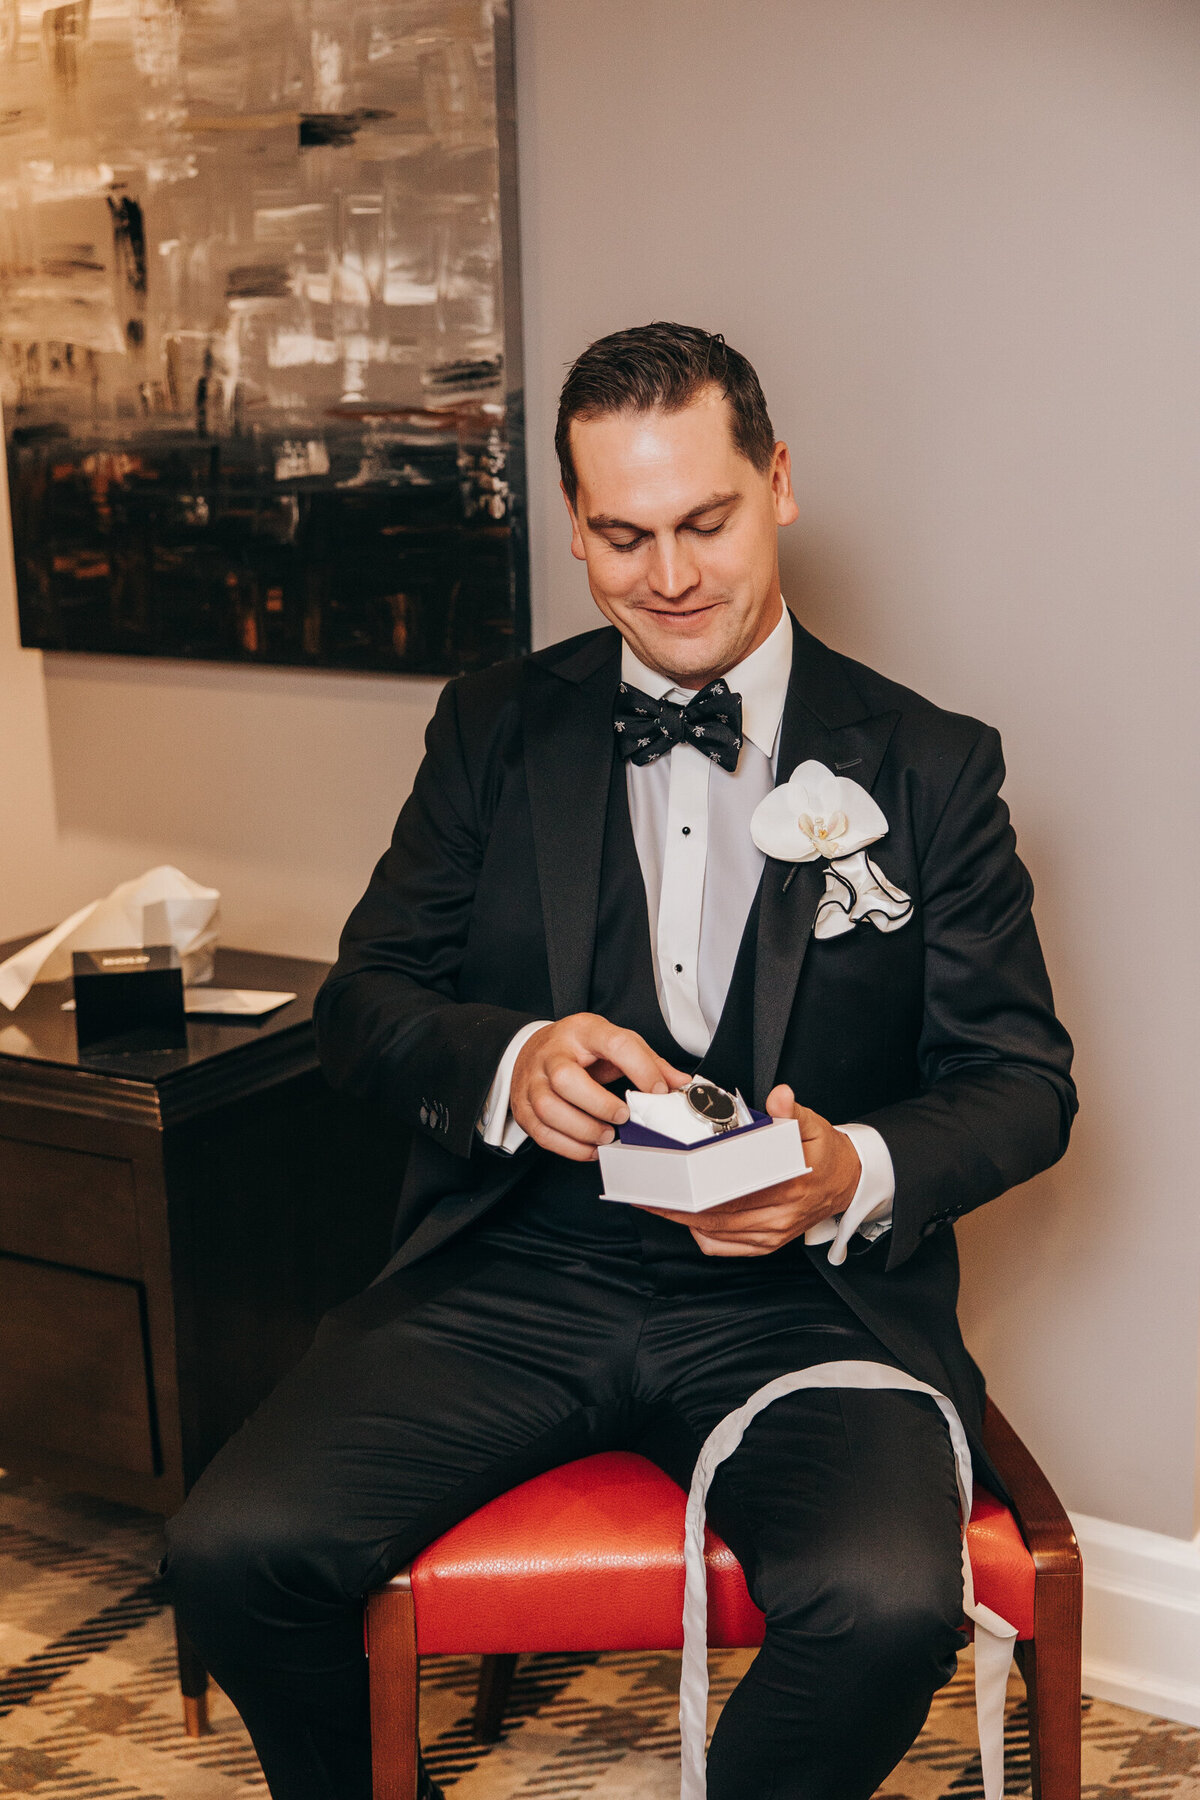 A groom in a black tux opening a gift from his bride